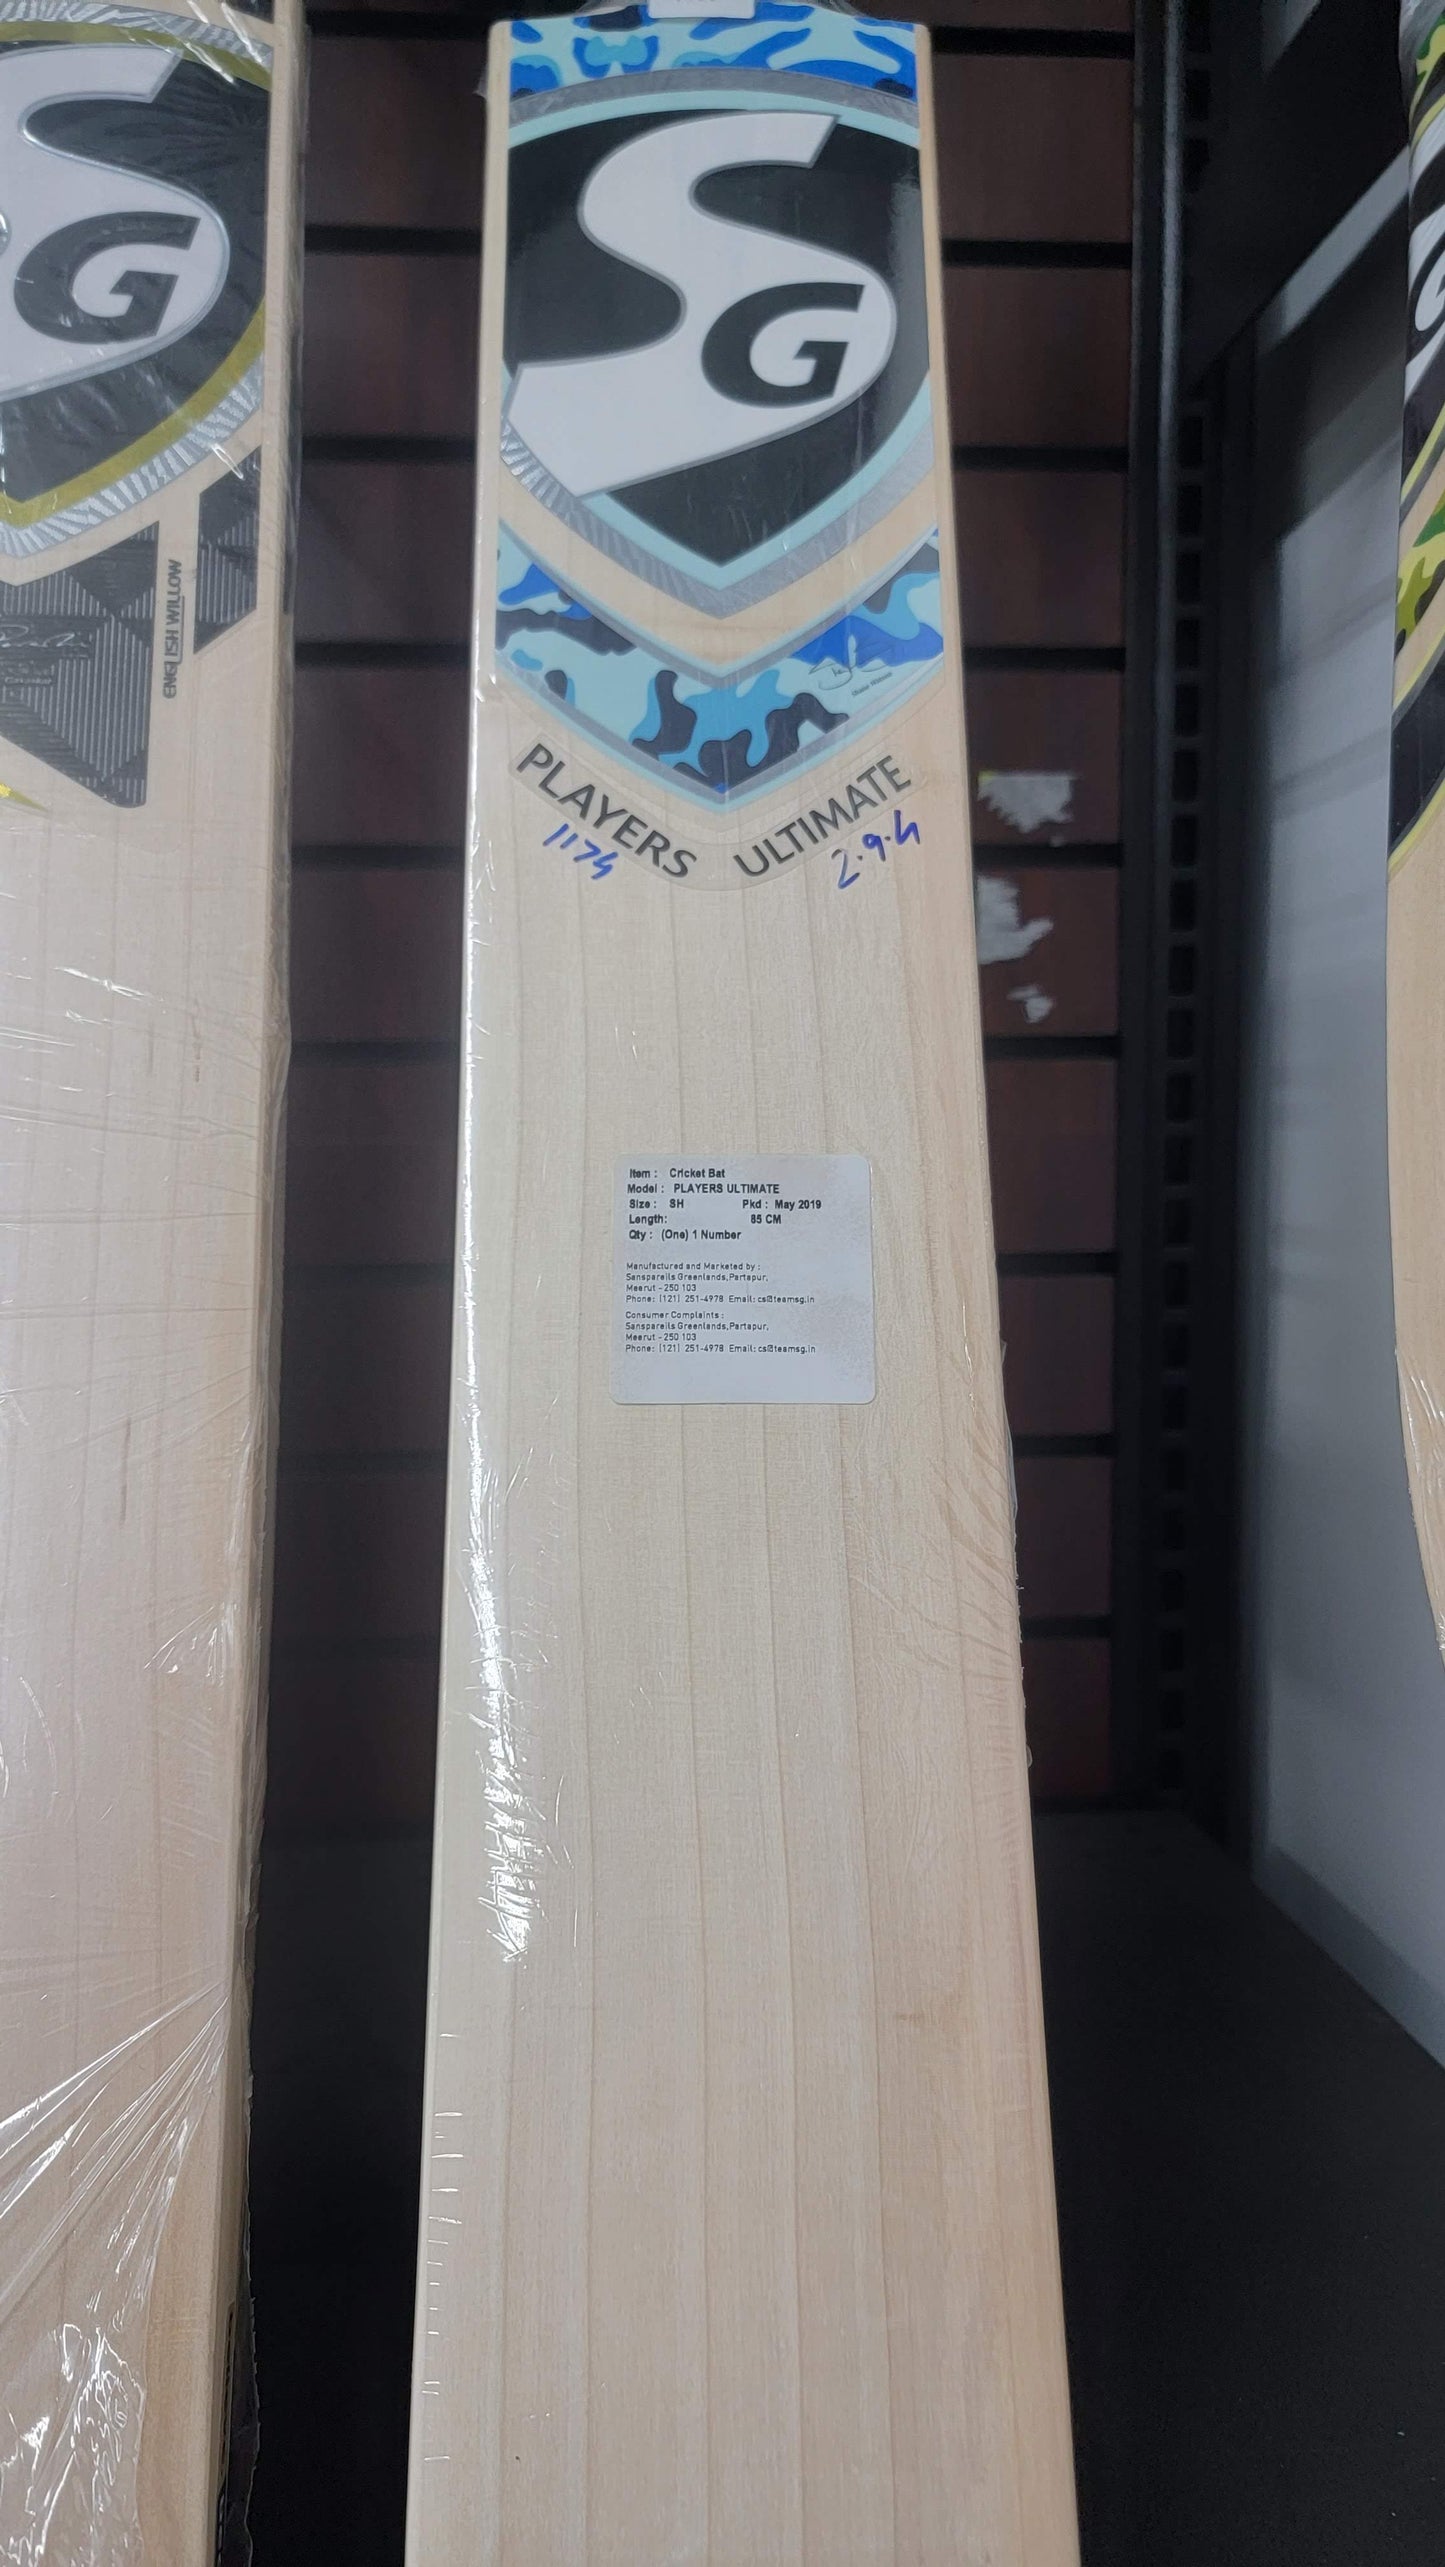 SG PLAYERS ULTIMATE English Willow Cricket Bat